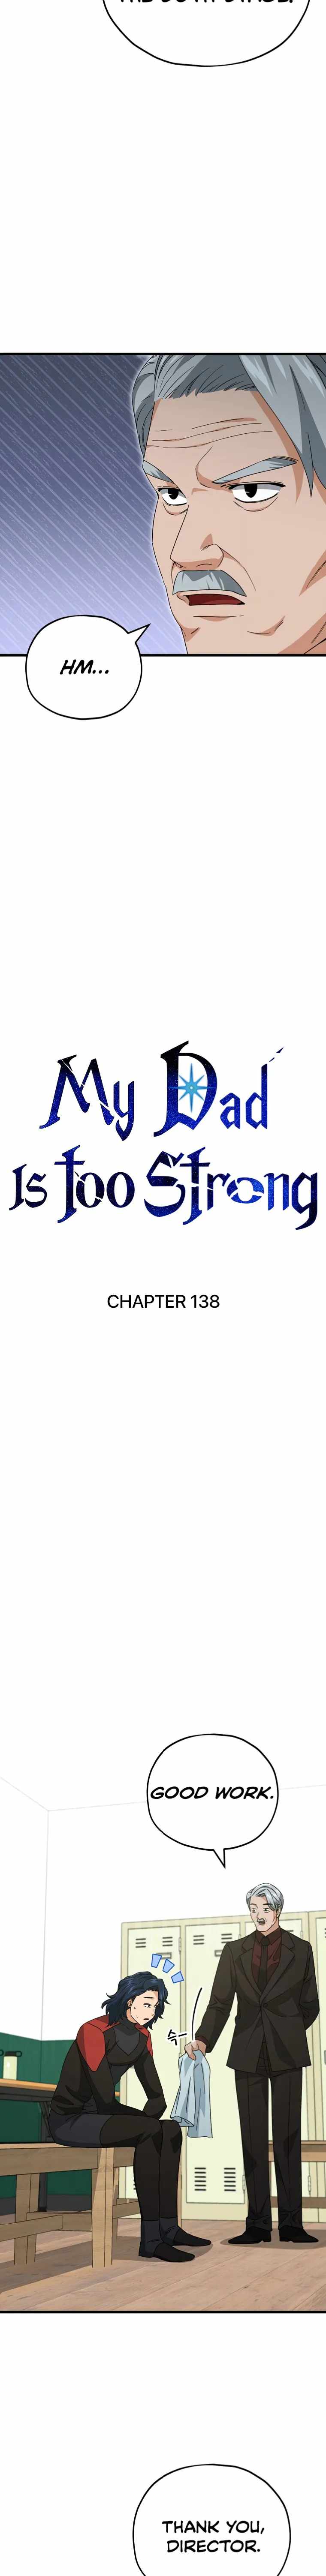 My Dad Is Too Strong Chapter 138-eng-li - Page 3